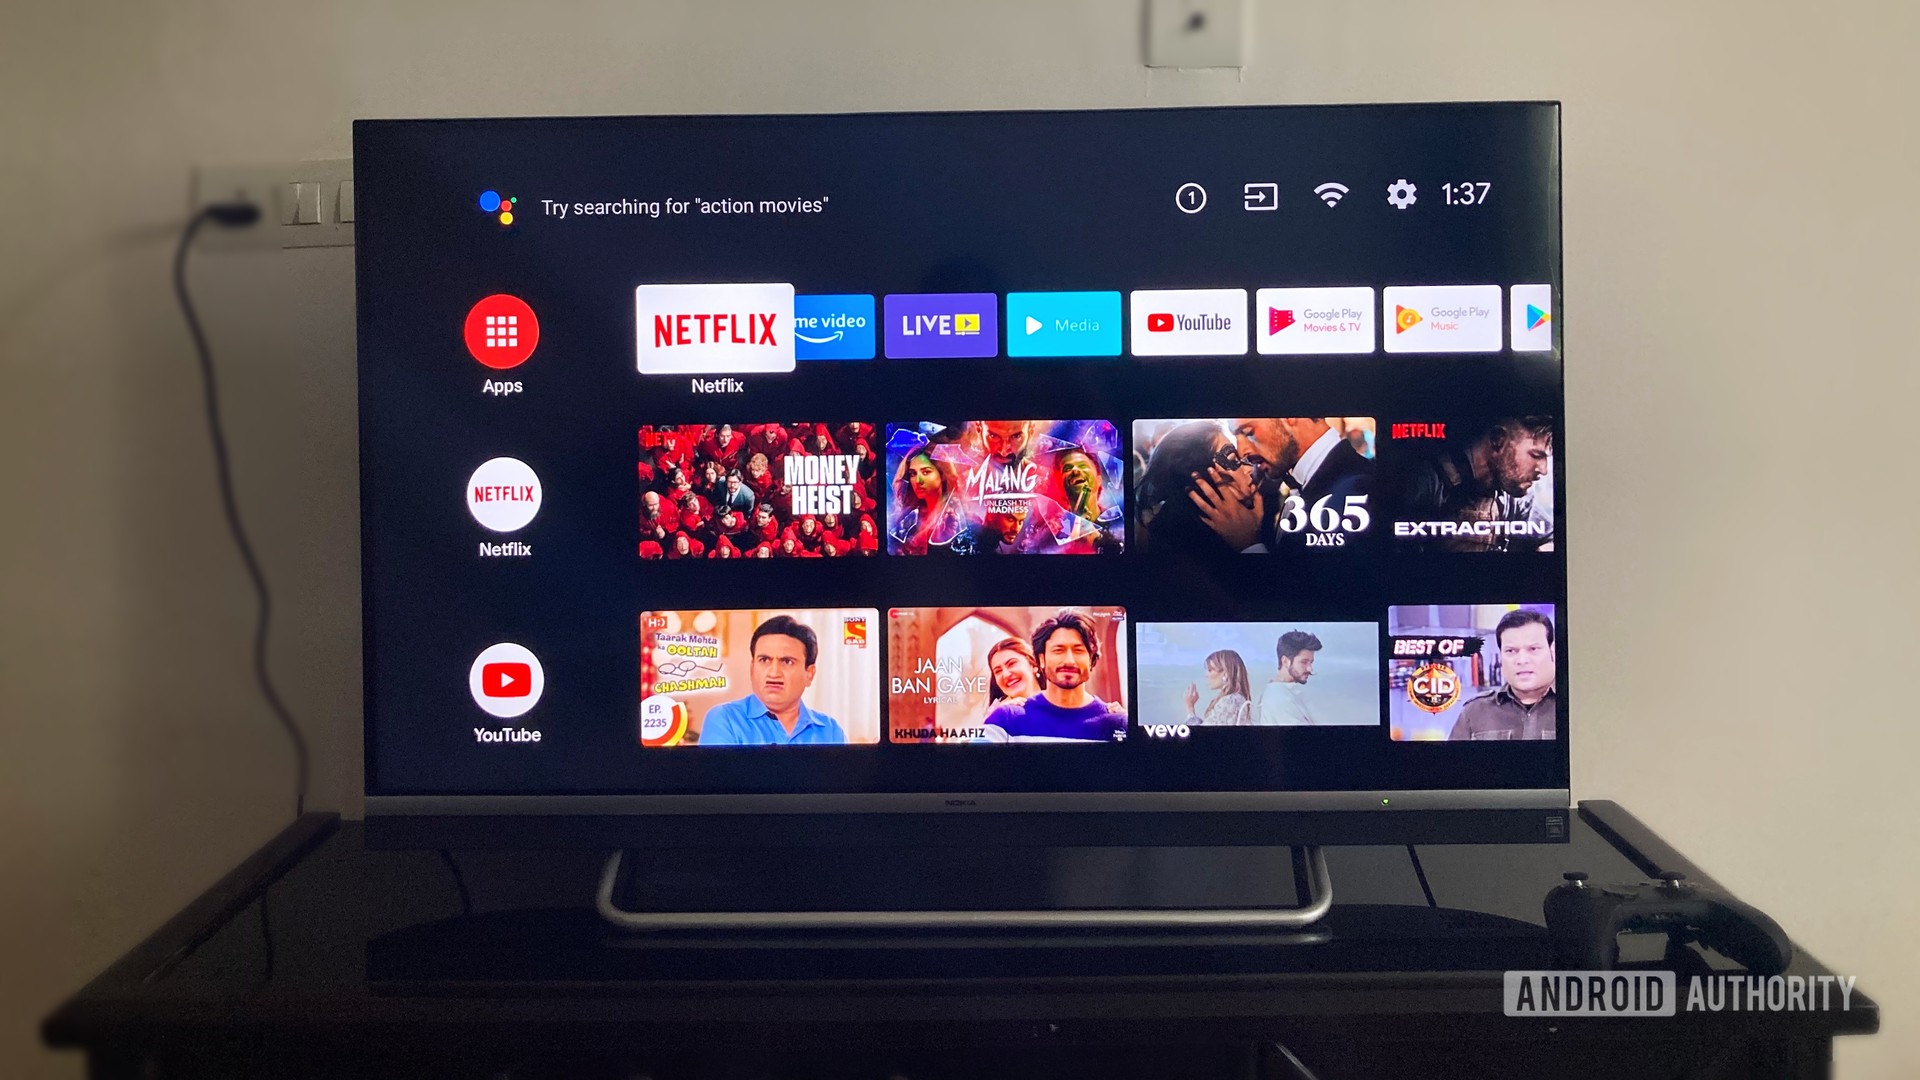 Tela inicial do Android TV